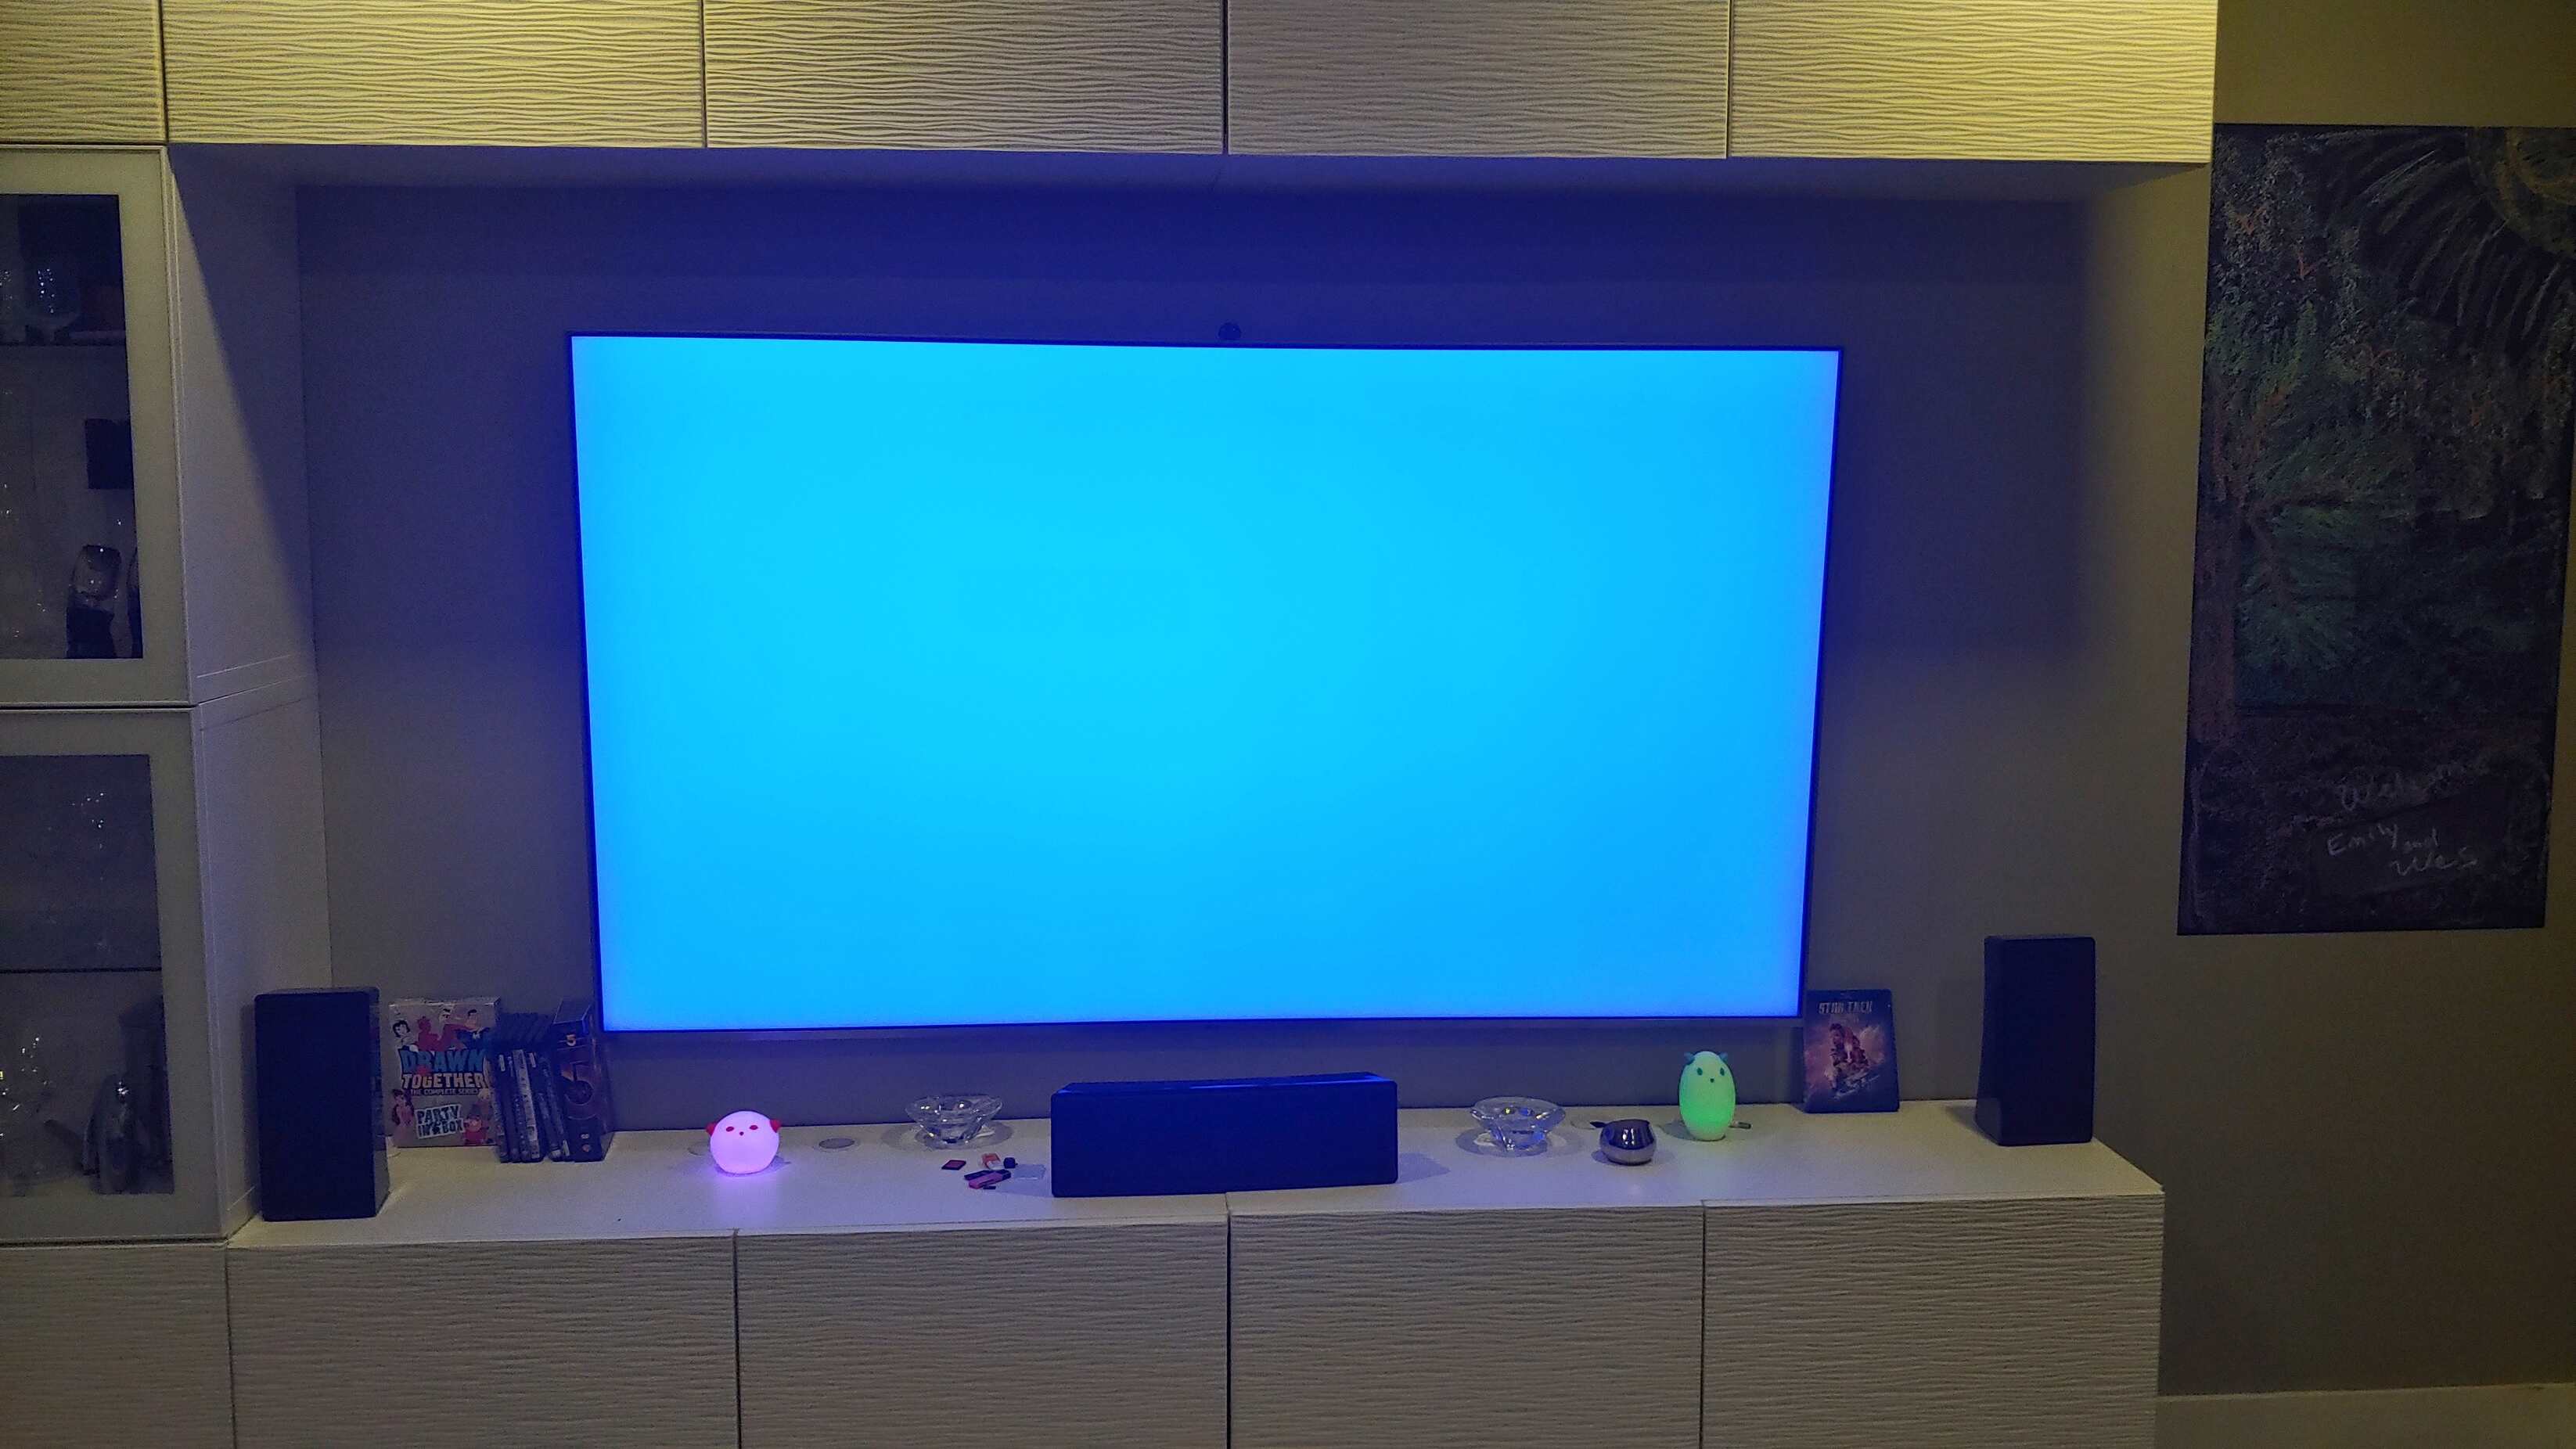 Why Does My TV Look Blue?